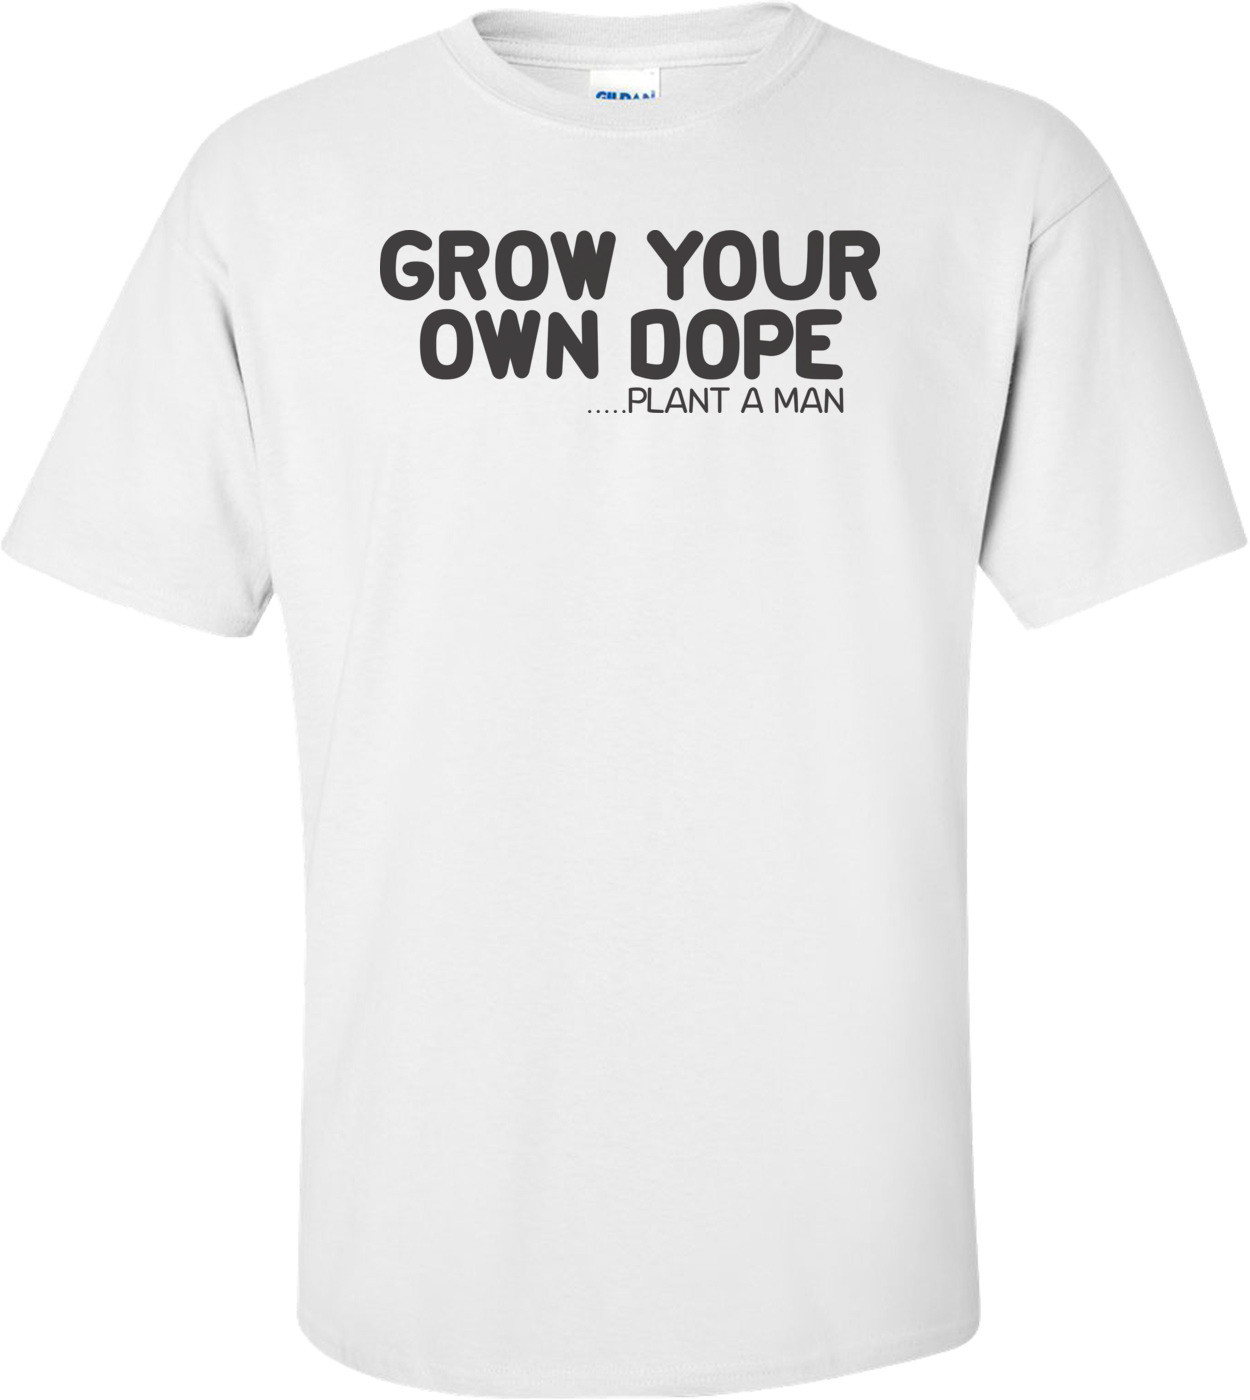 Grow Your Own Dope Plant A Man T-shirt